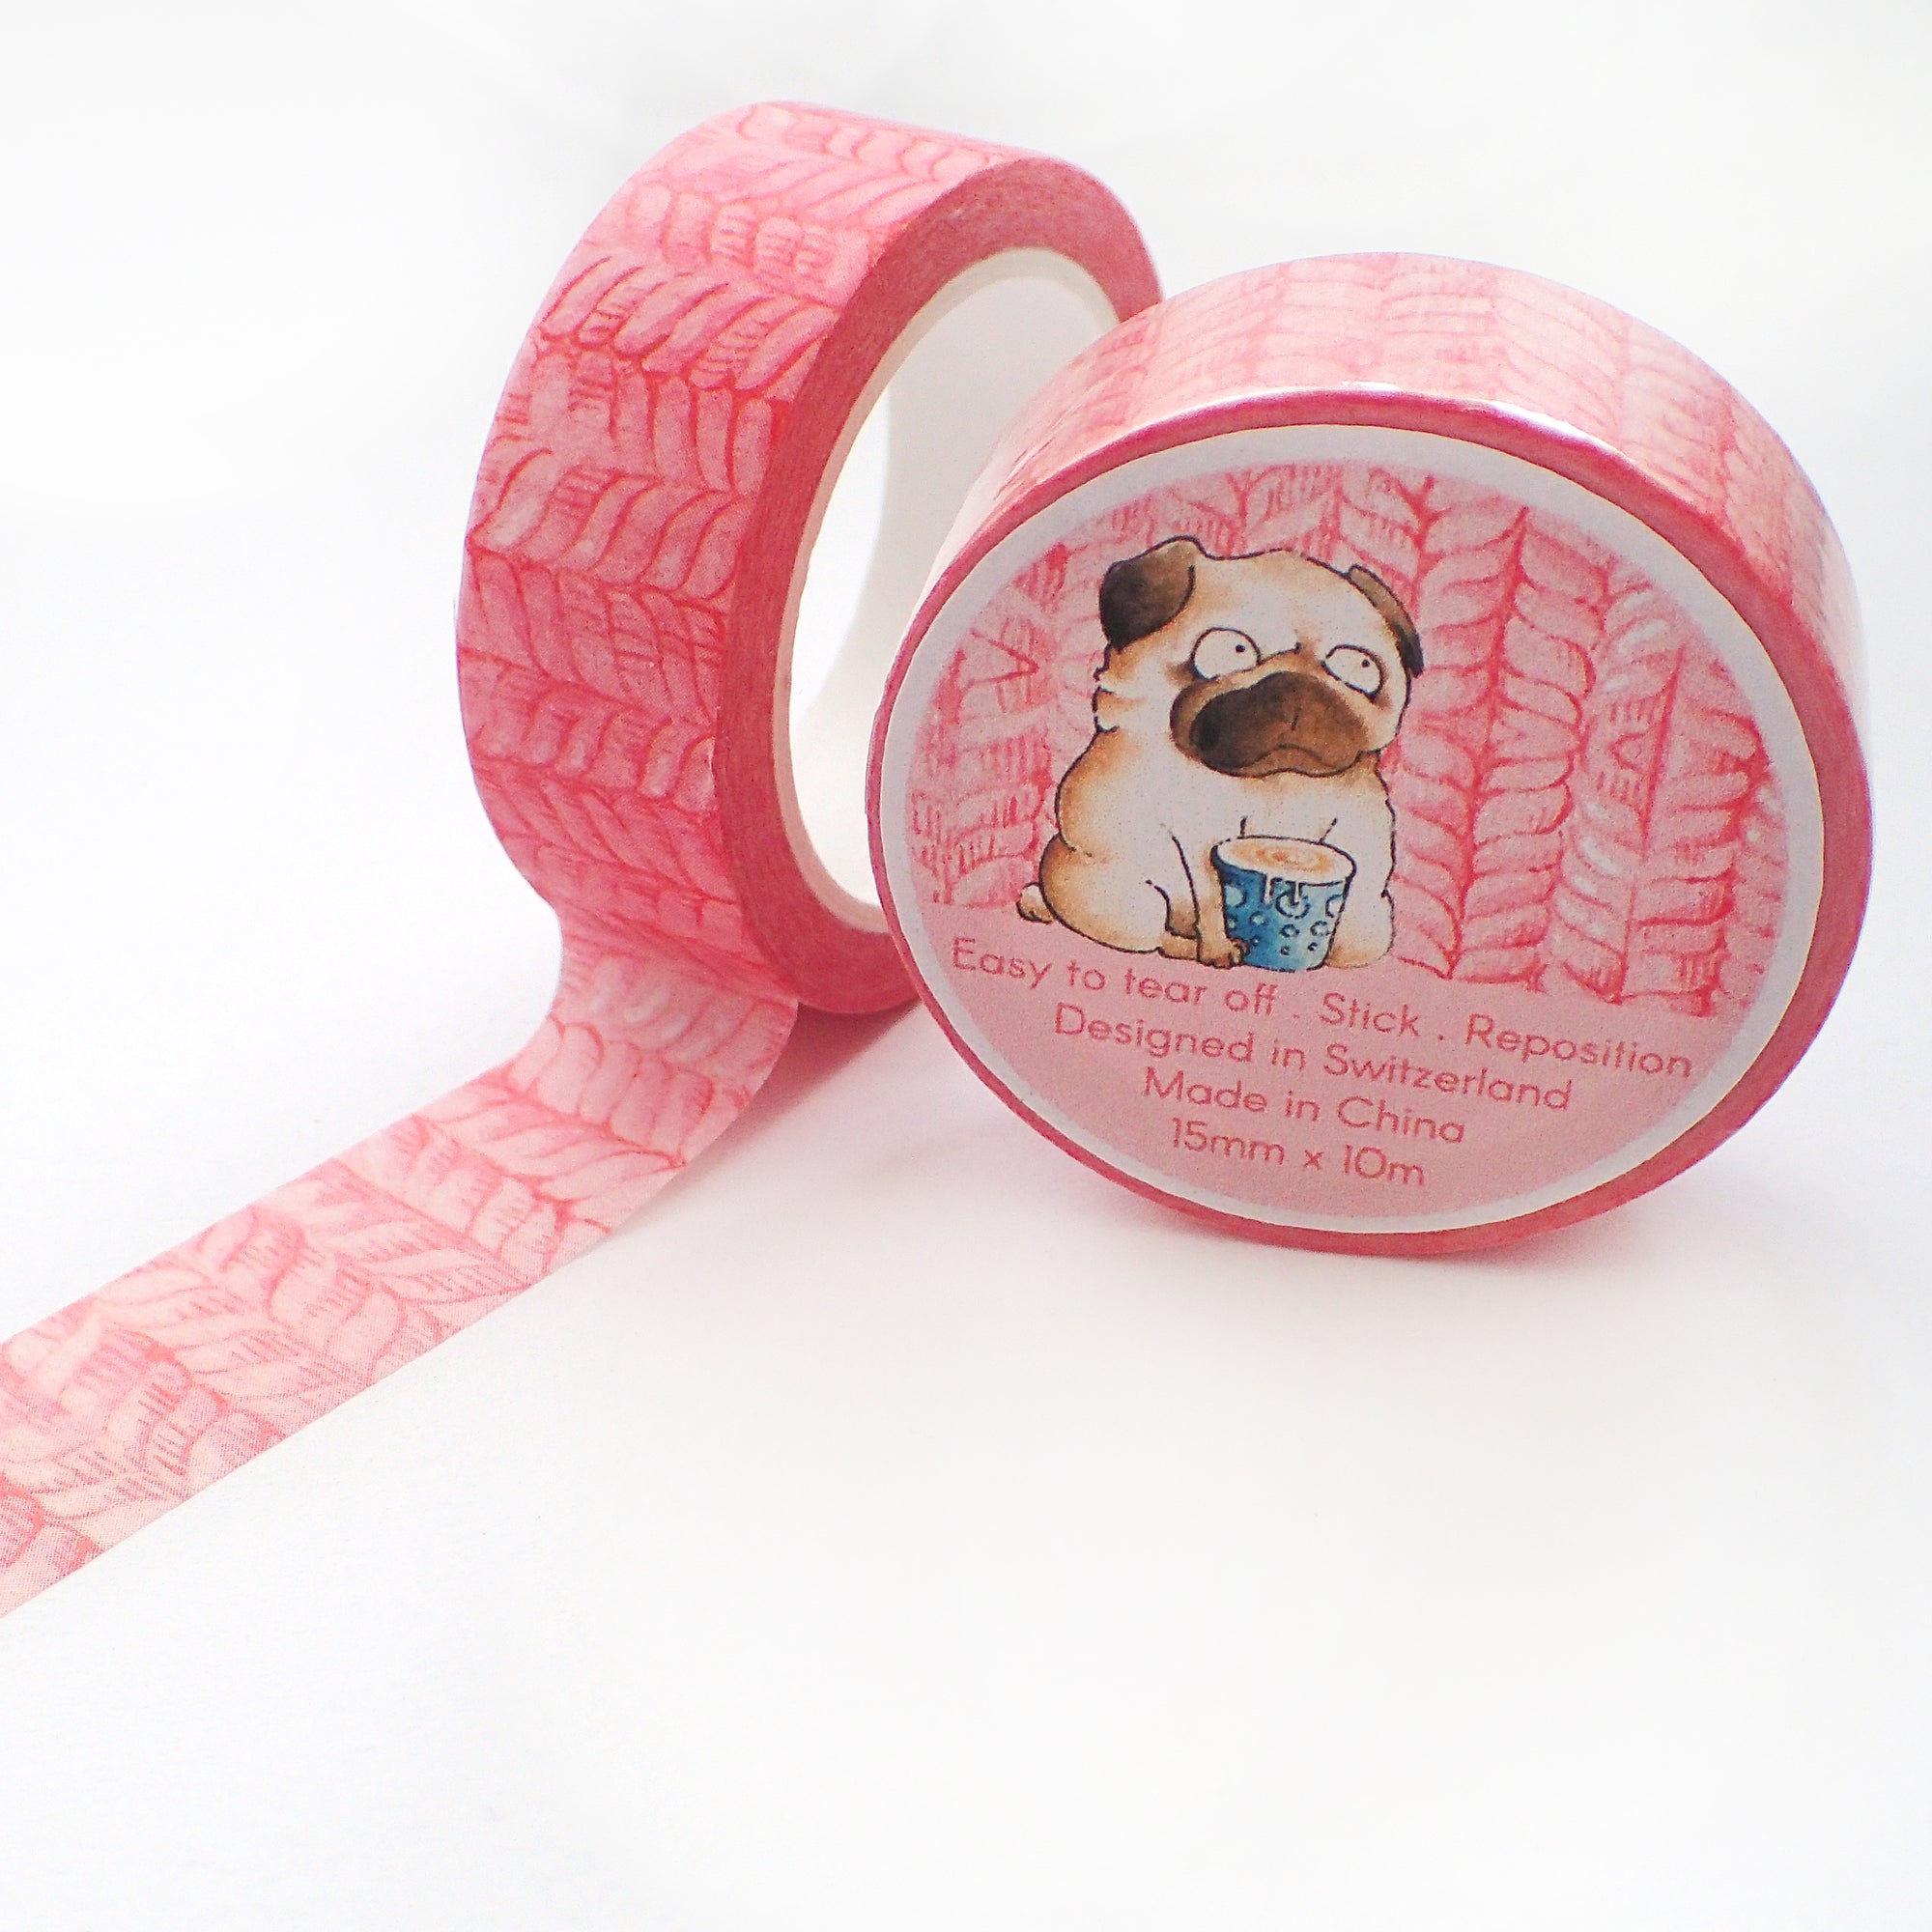 A Pug&#39;s Life - 15mm Washi Tape - Pink Scarf